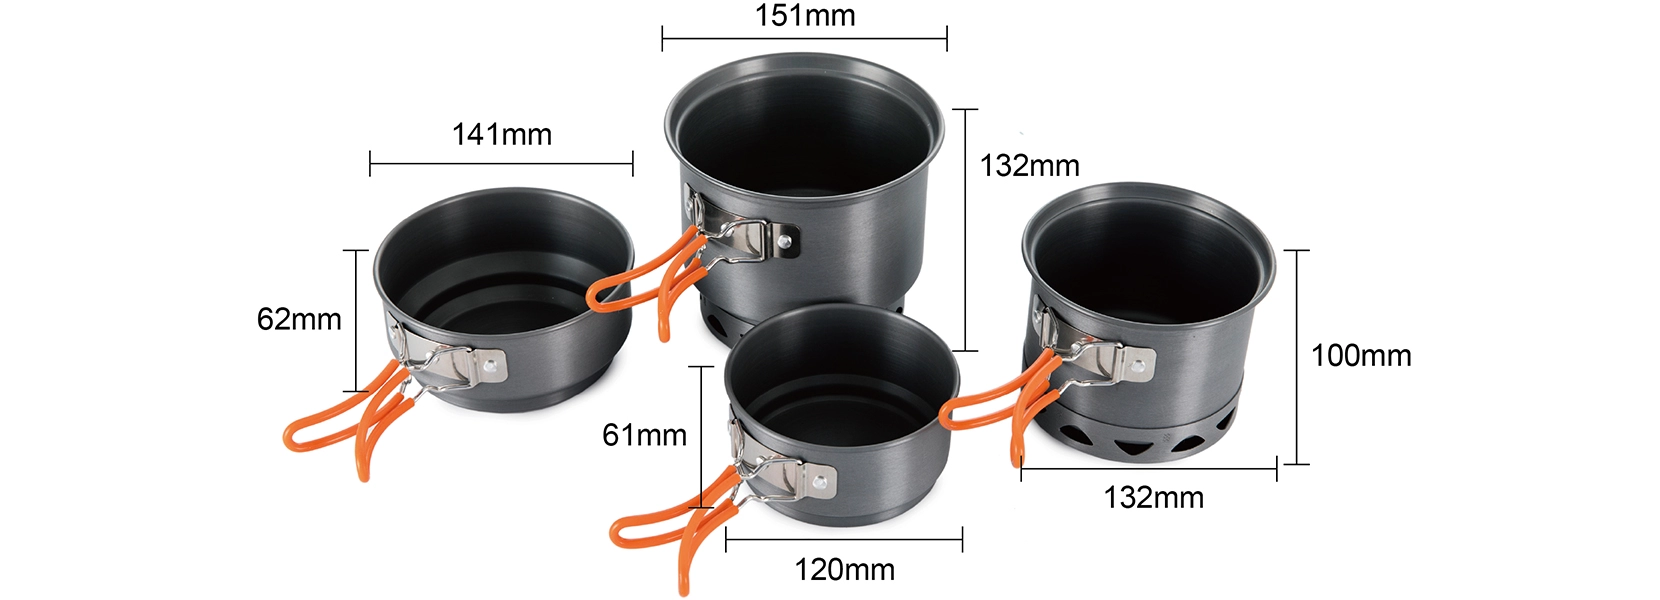 details of Heat Exchanger System Cookware Sets for Fishing